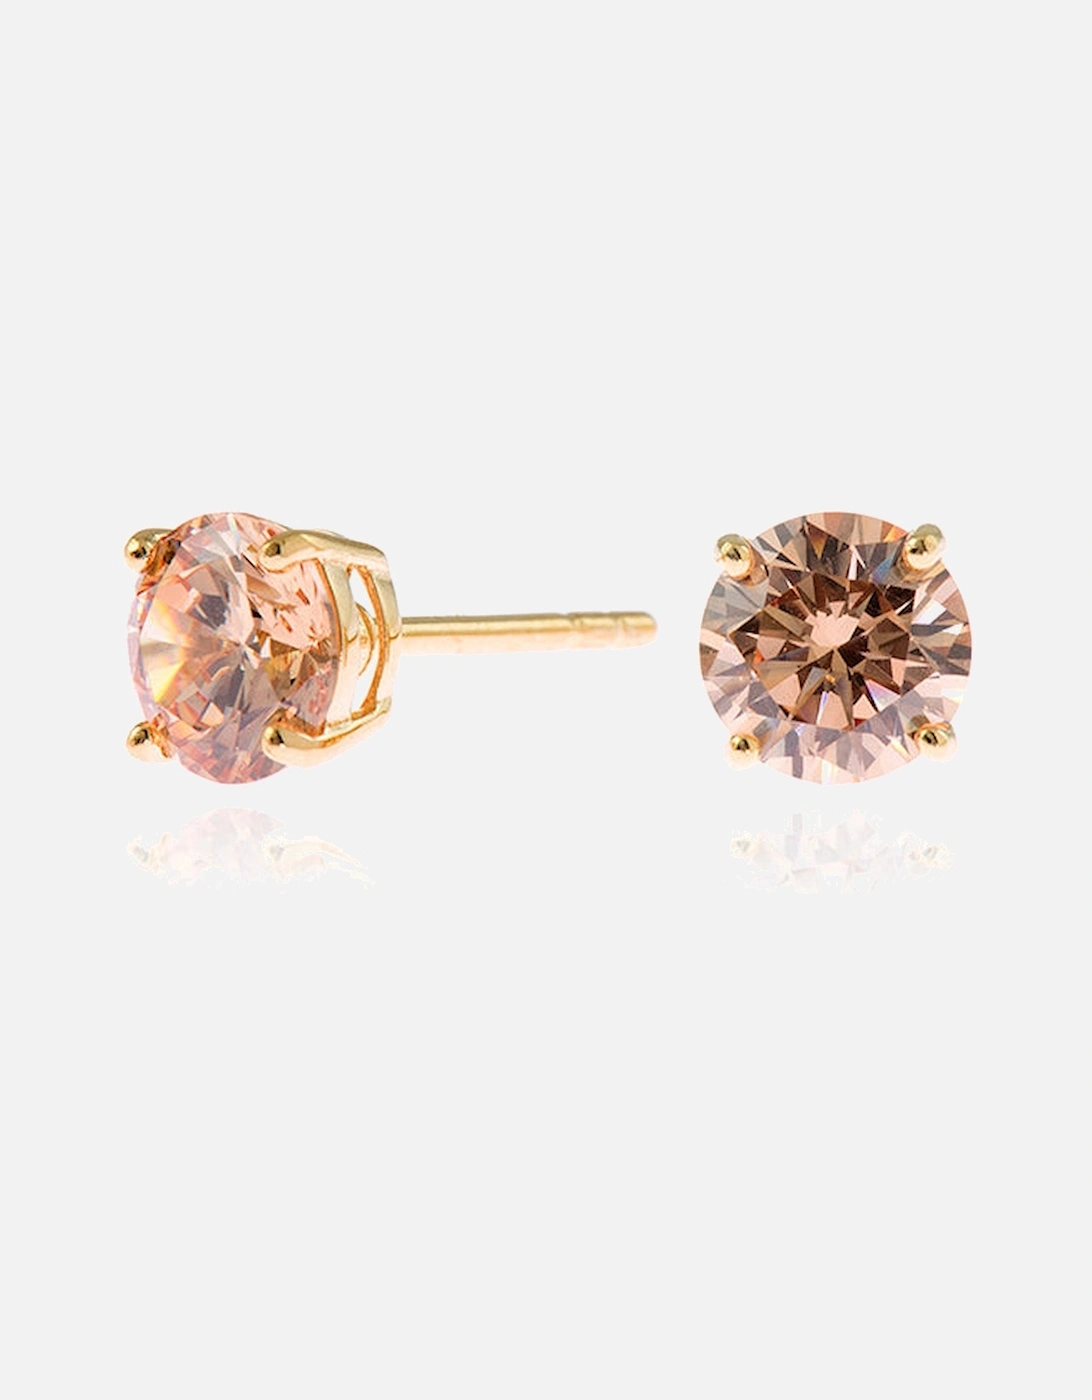 Cachet Lana 6mm Earrings Champagne CZ 18ct Gold Plated